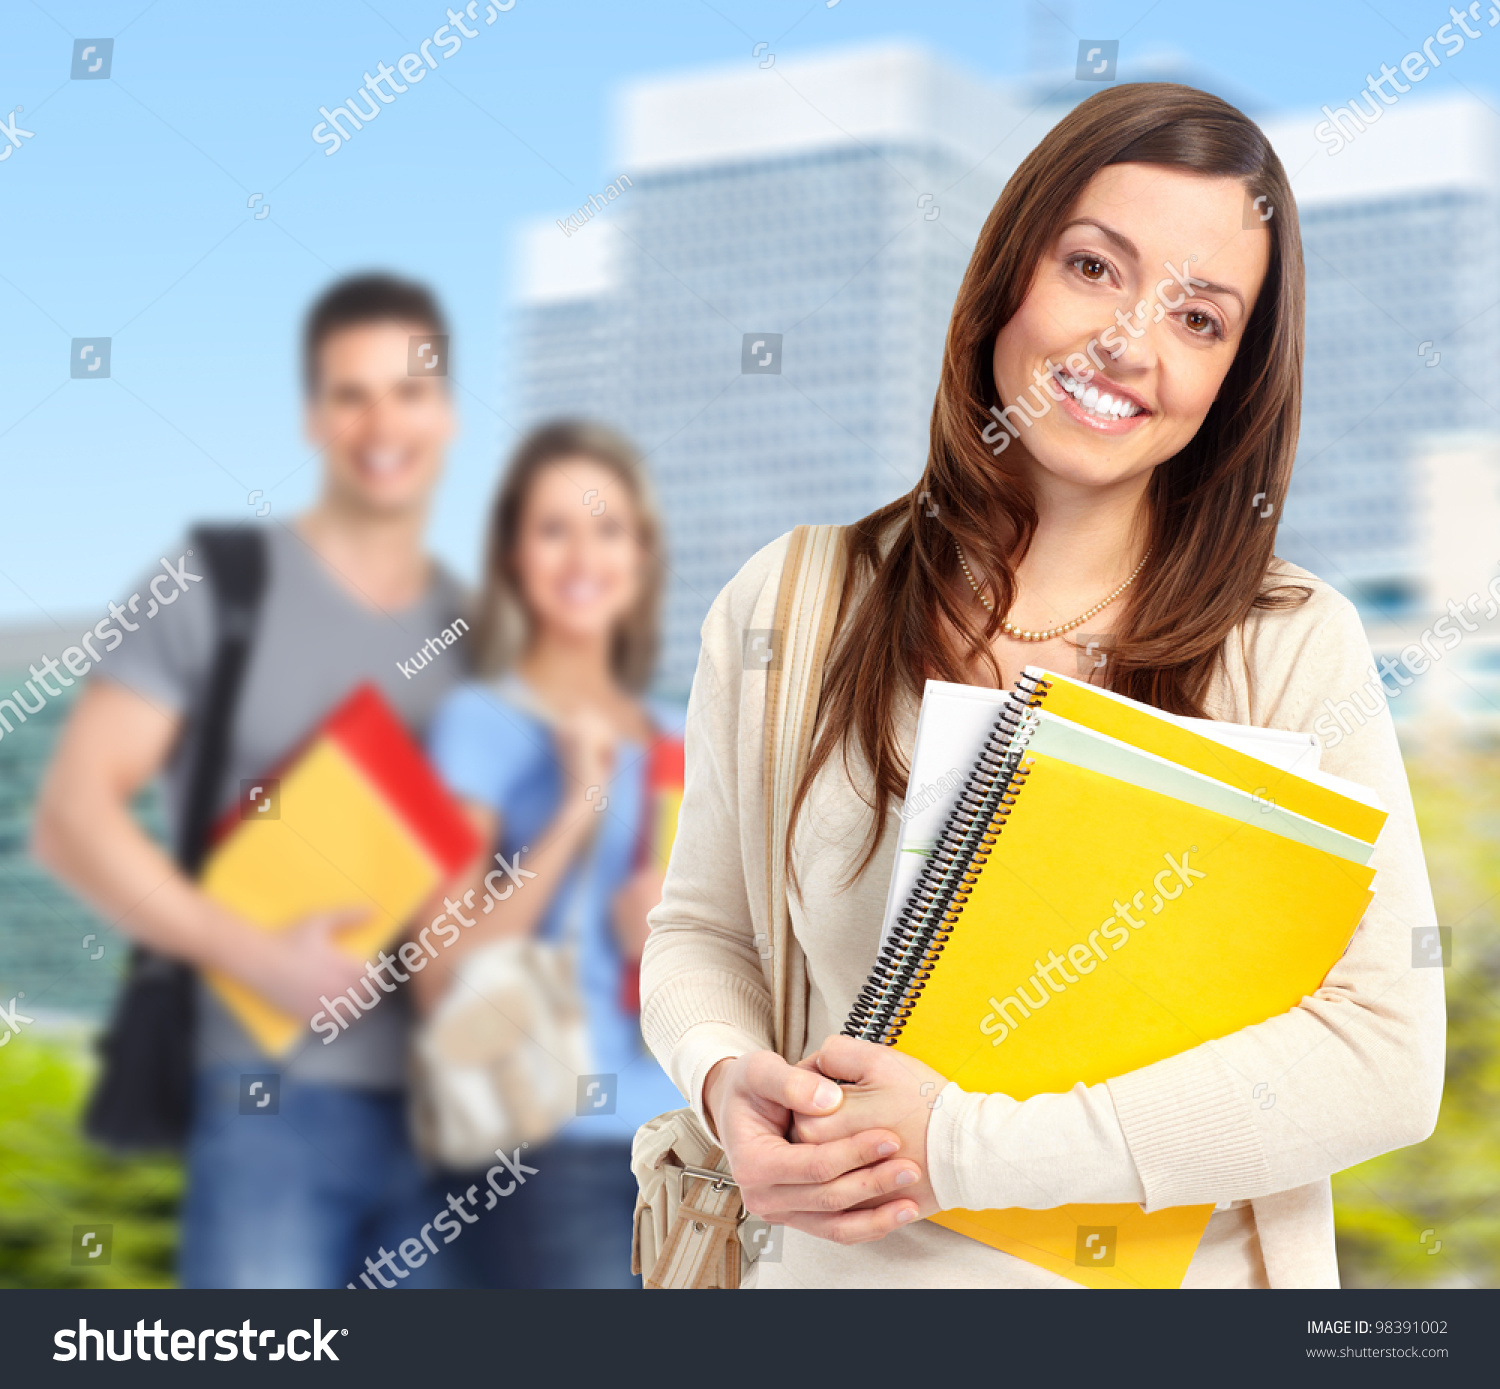 Young smiling  student woman with book. University education. #98391002